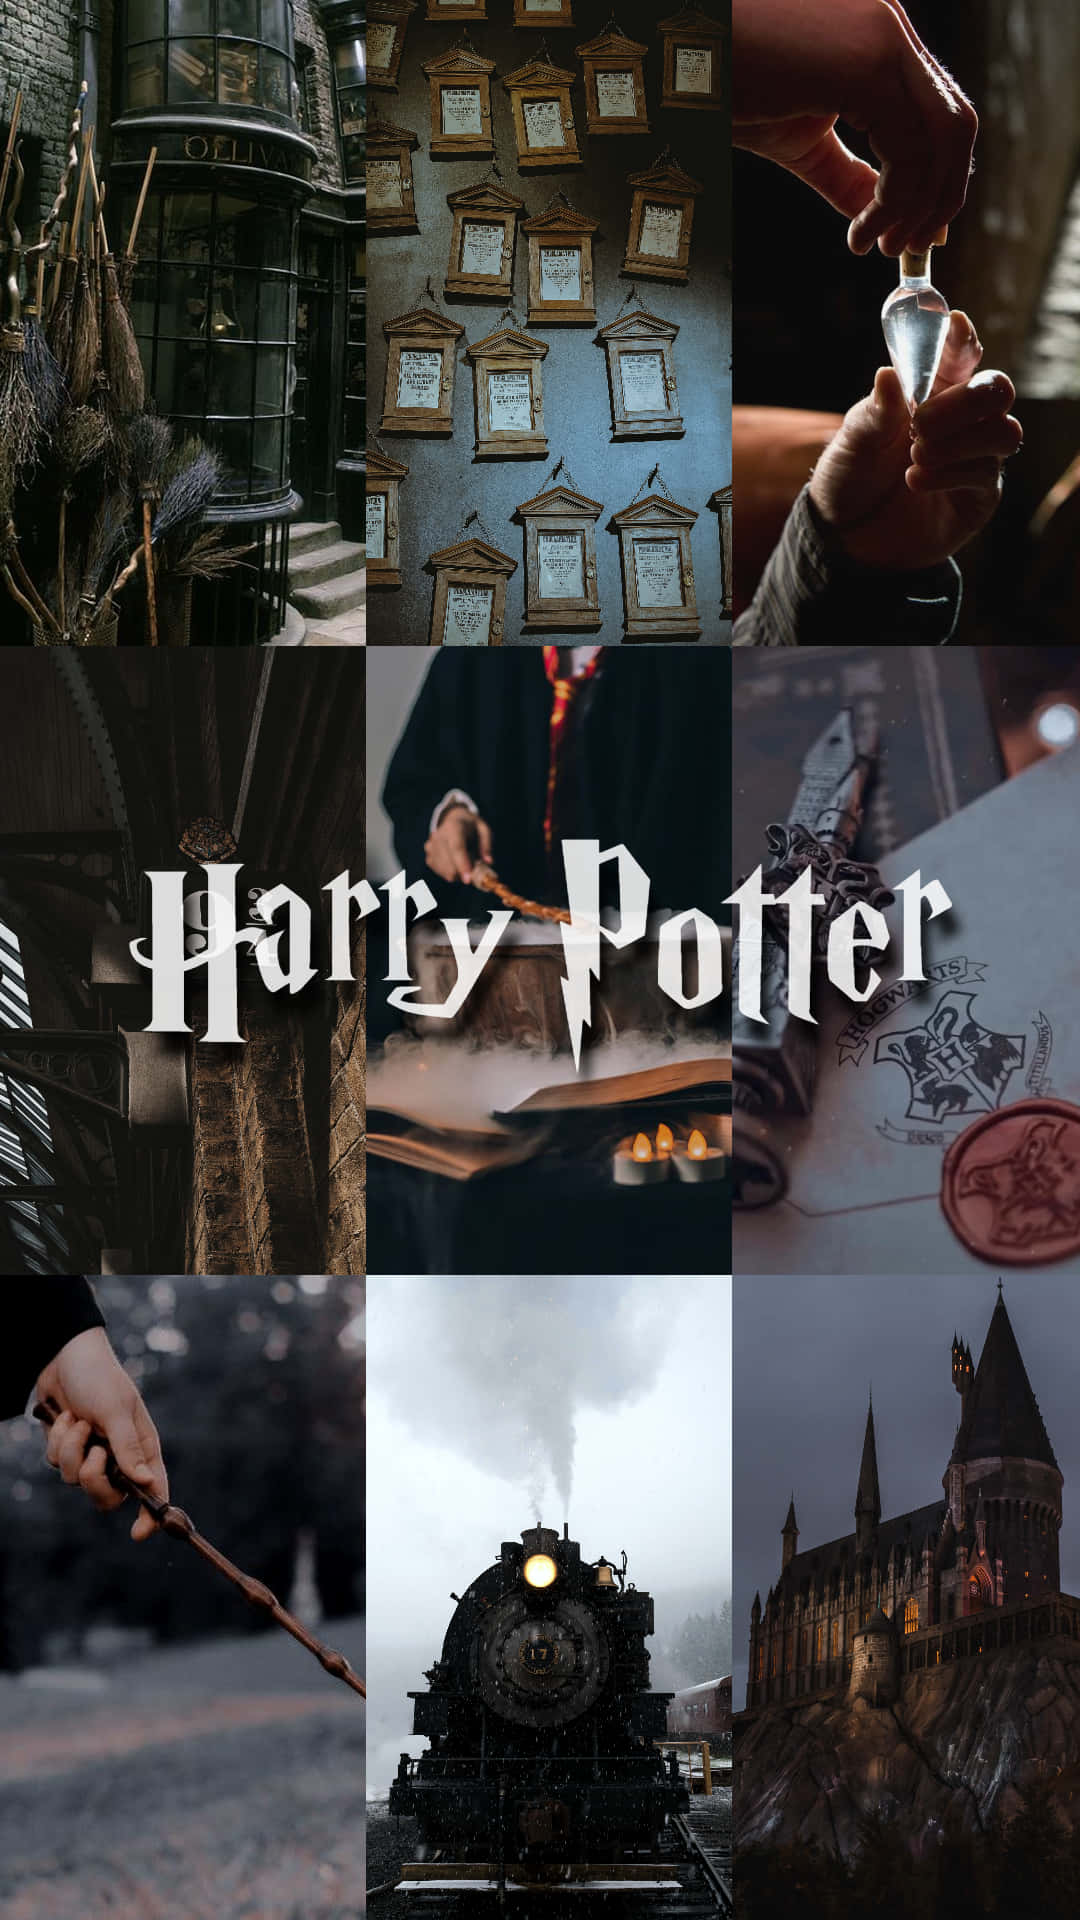 Cool Stuff: Mesmerizing Harry Potter Wallpaper Includes The Marauder's Map,  Black Family Tree & More